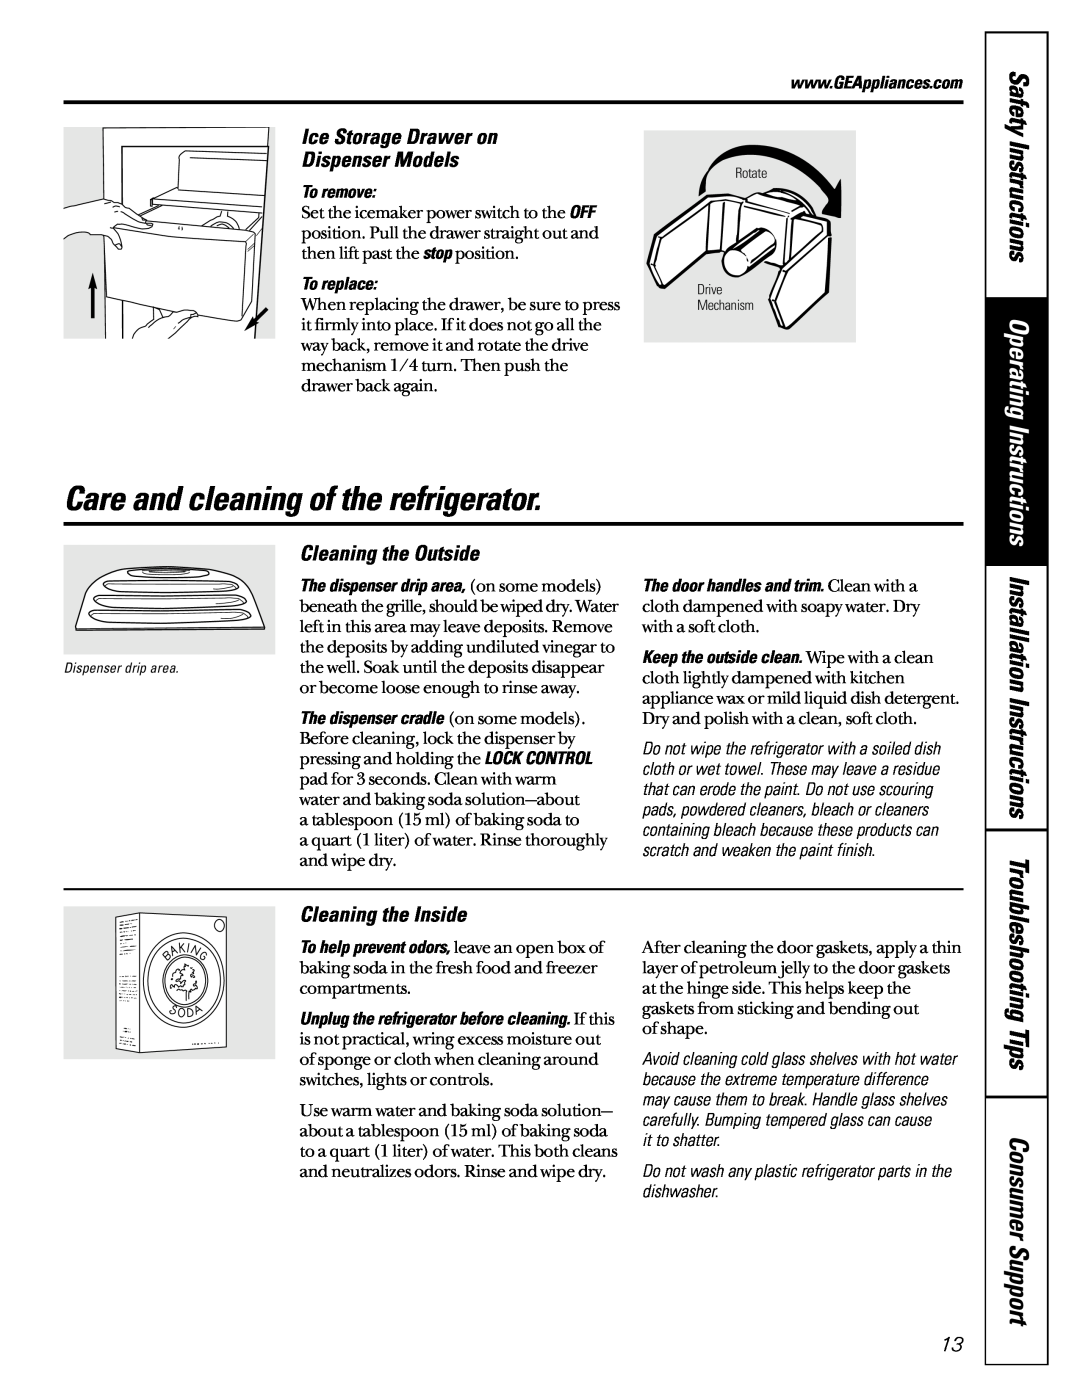 GE 21 Care and cleaning of the refrigerator, Safety Instructions Operating Instructions, Cleaning the Outside, To remove 